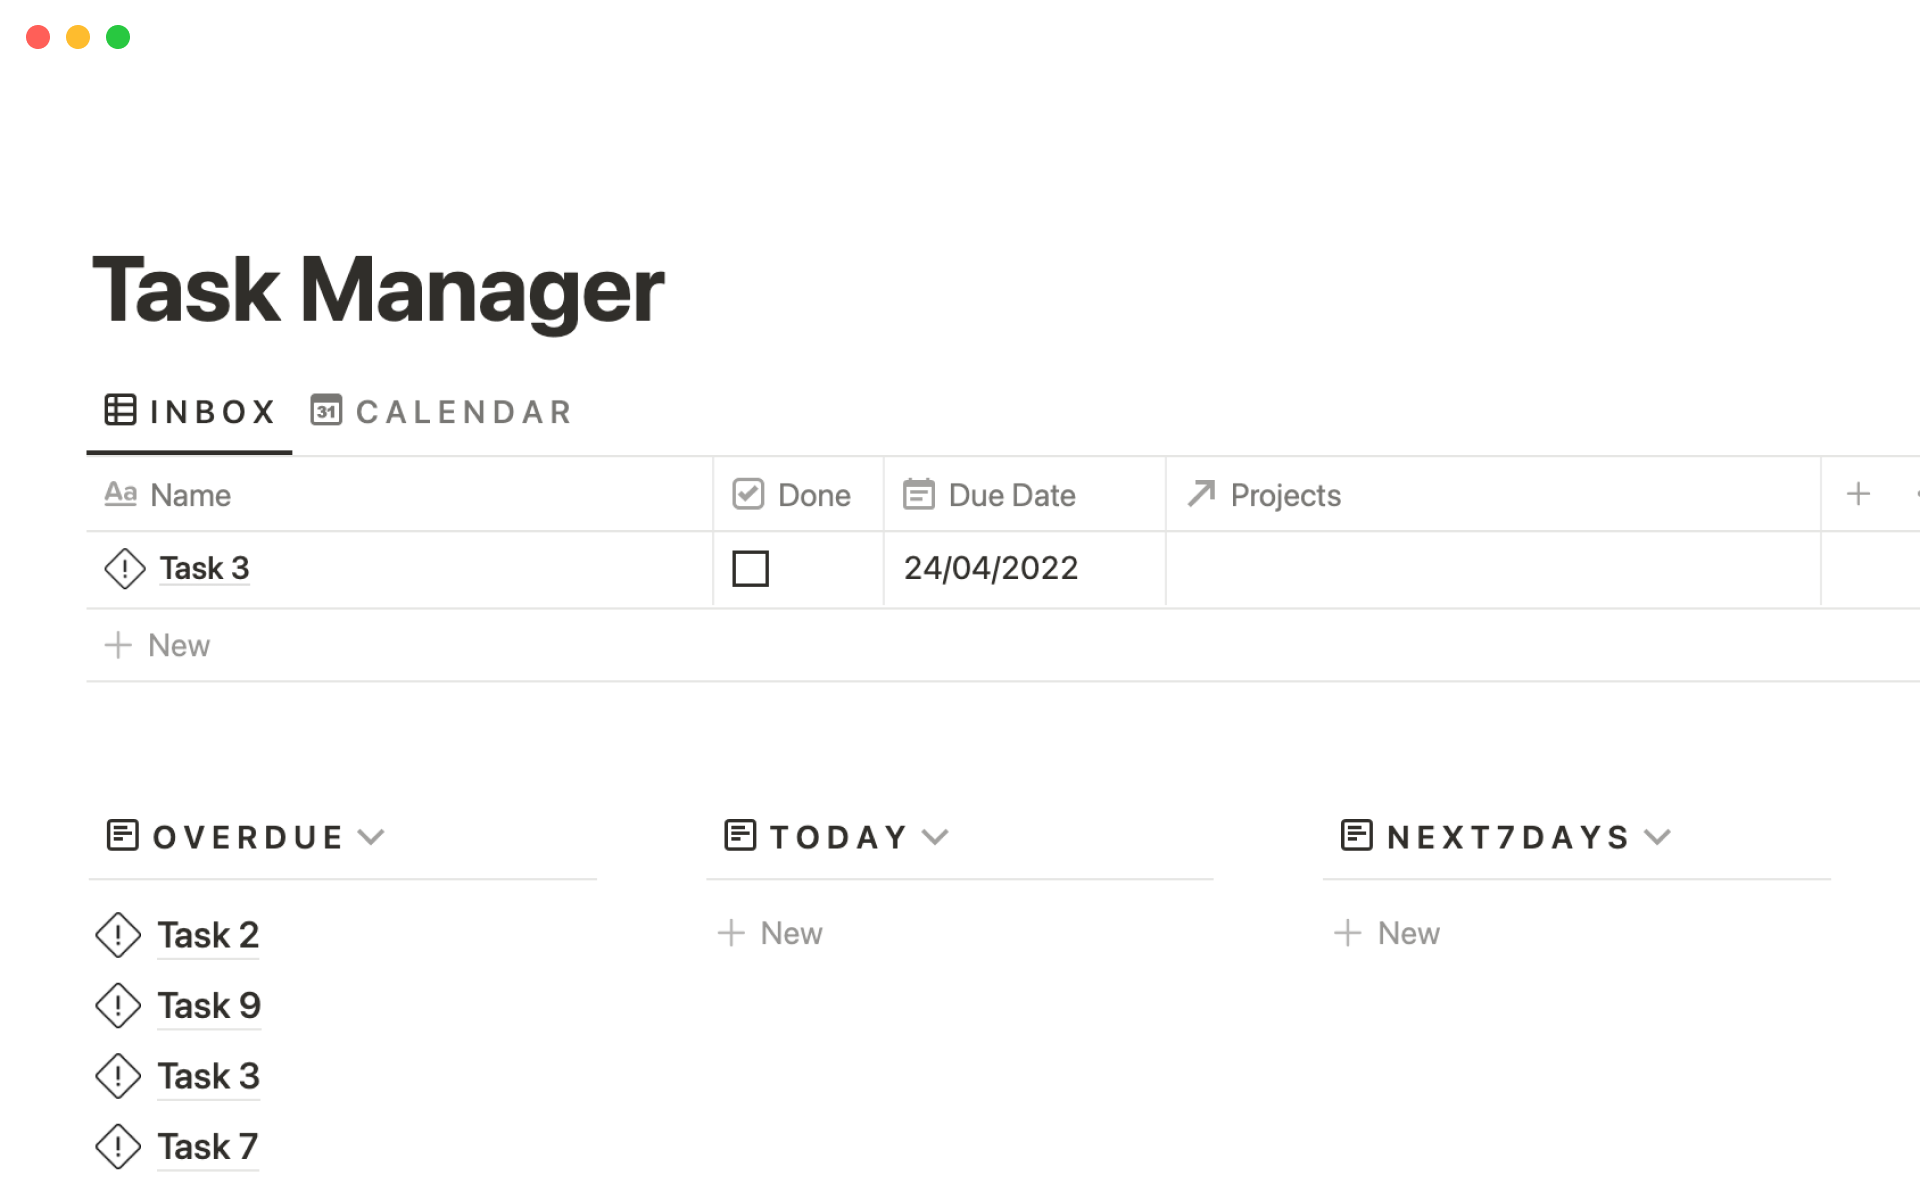 Organise your tasks with an overview of upcoming and overdue tasks.